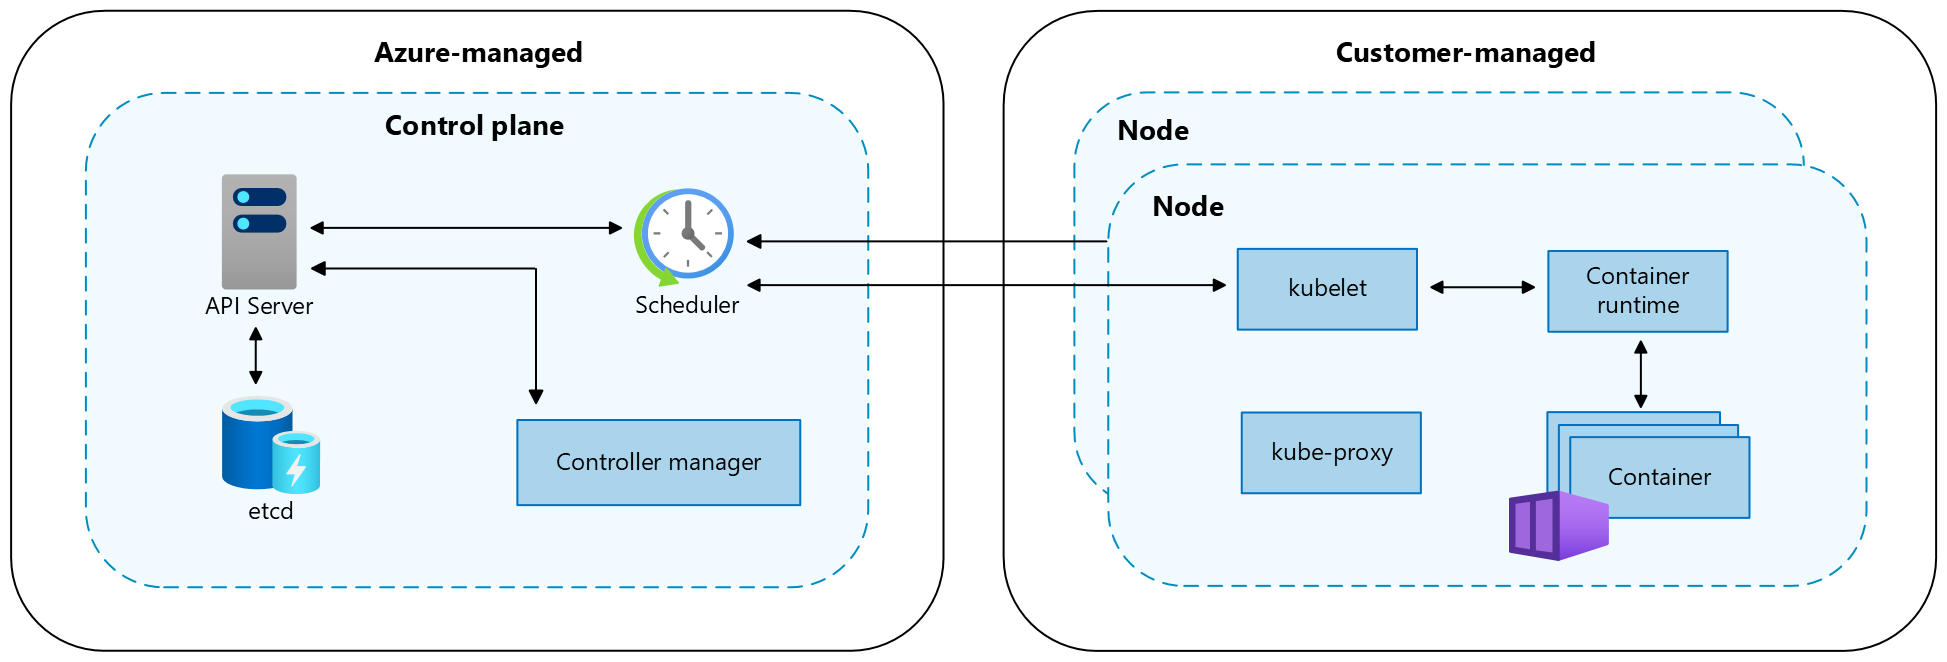 Kubernetes control plane and node components